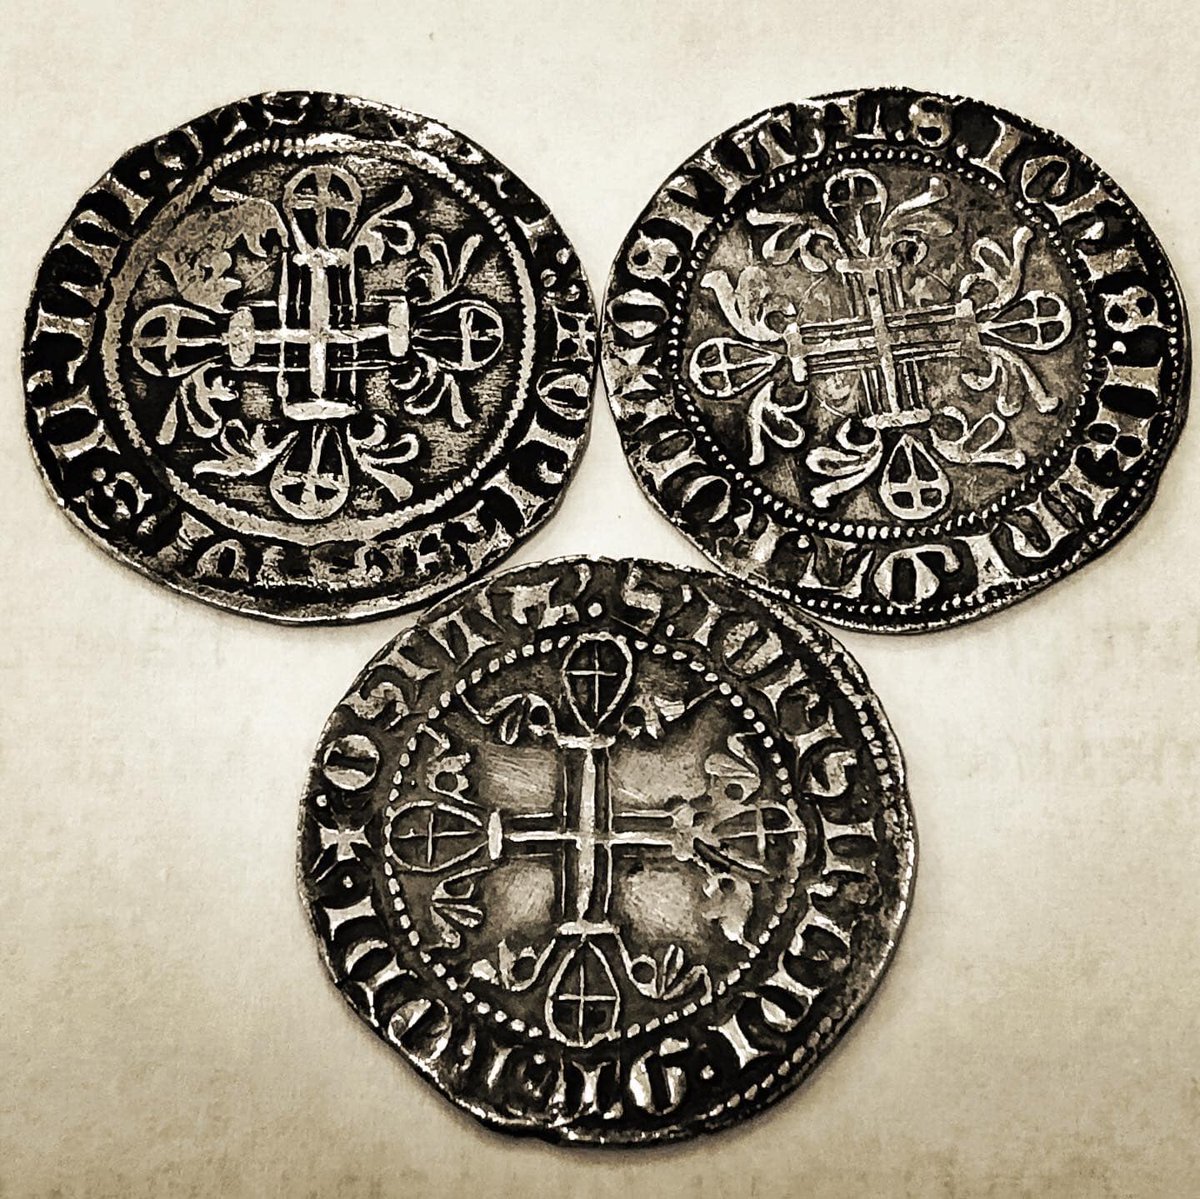 Medieval Coins My Gigliatos Grand Master of the Knights of Rhodes  
“Dieudonné de Gozon” from 1346 to 1353 
“Helion de Villeneuve” from 1319-1346 
'Raymond Berenger' from 1365-1974 
#medieval #medievalcoins #coincollection #coins #Rhodes #KnightsofSaintJohn